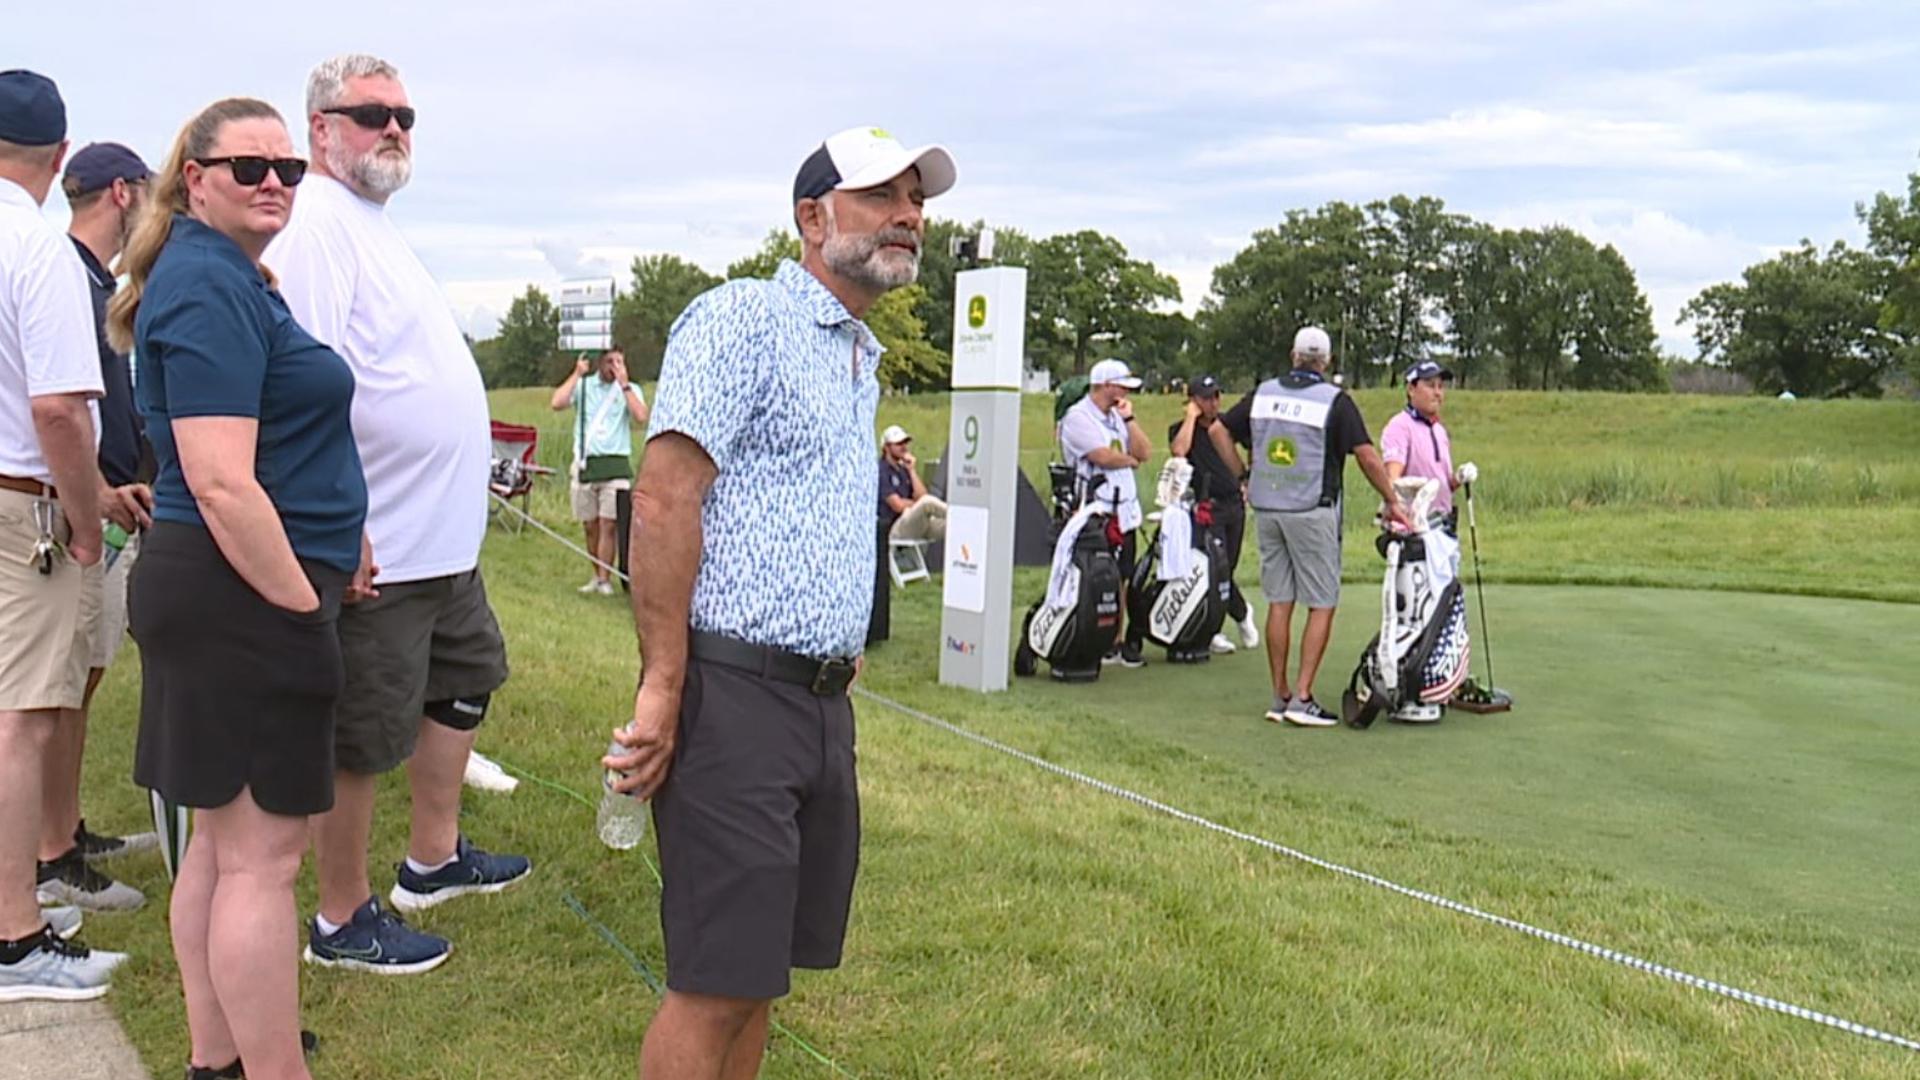 News 8's Jenna Minor takes us through the day of Dino Leone, who spent his holiday running in the morning and watching some golf out at TPC Deere Run.